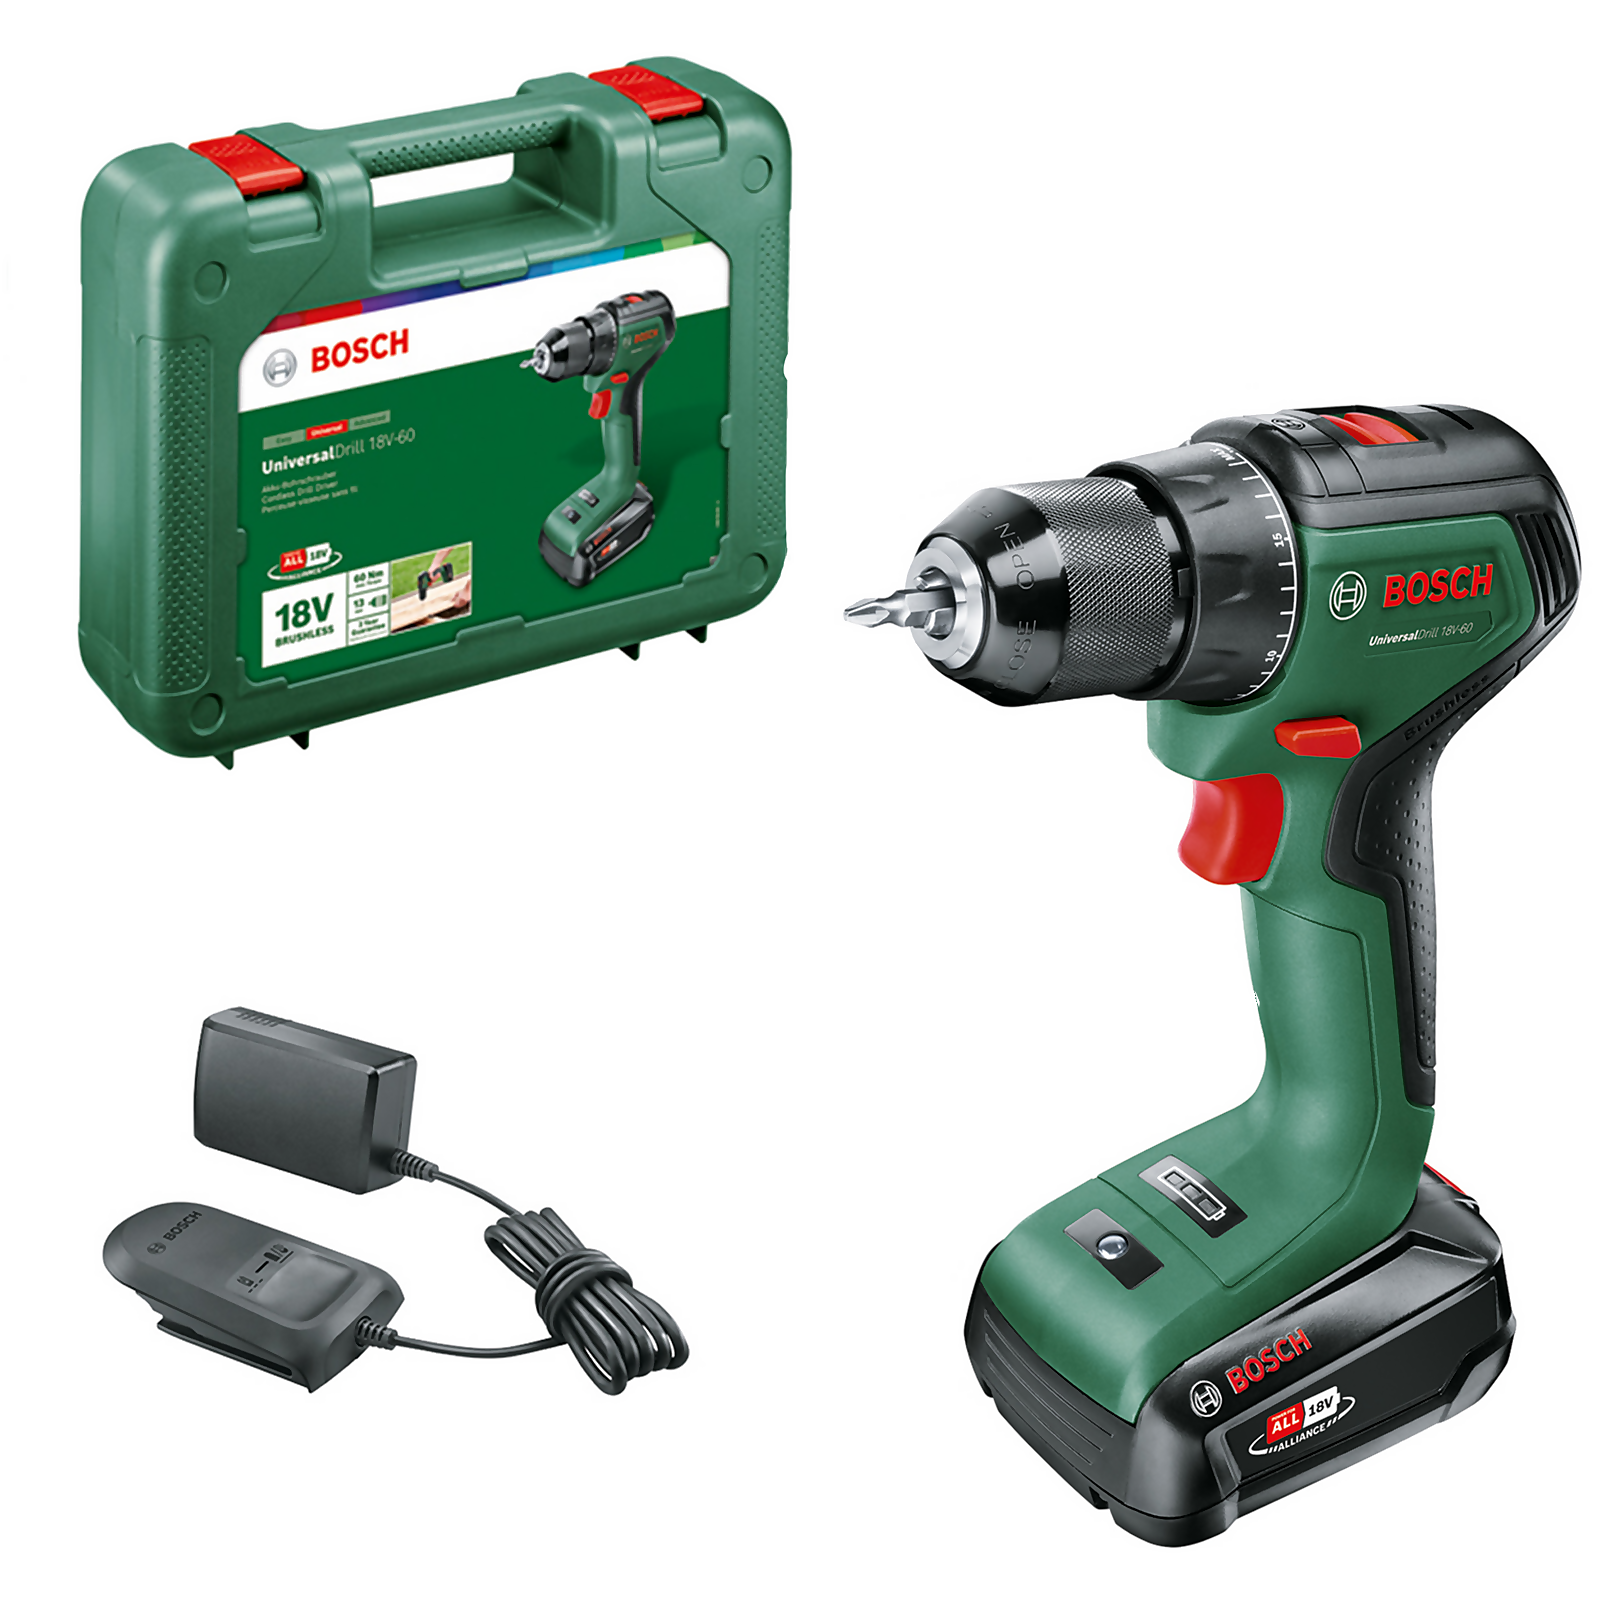 Photo of Bosch Universaldrill 18v60 With 1x 2 0ah Battery & Al 18v 20 Charger